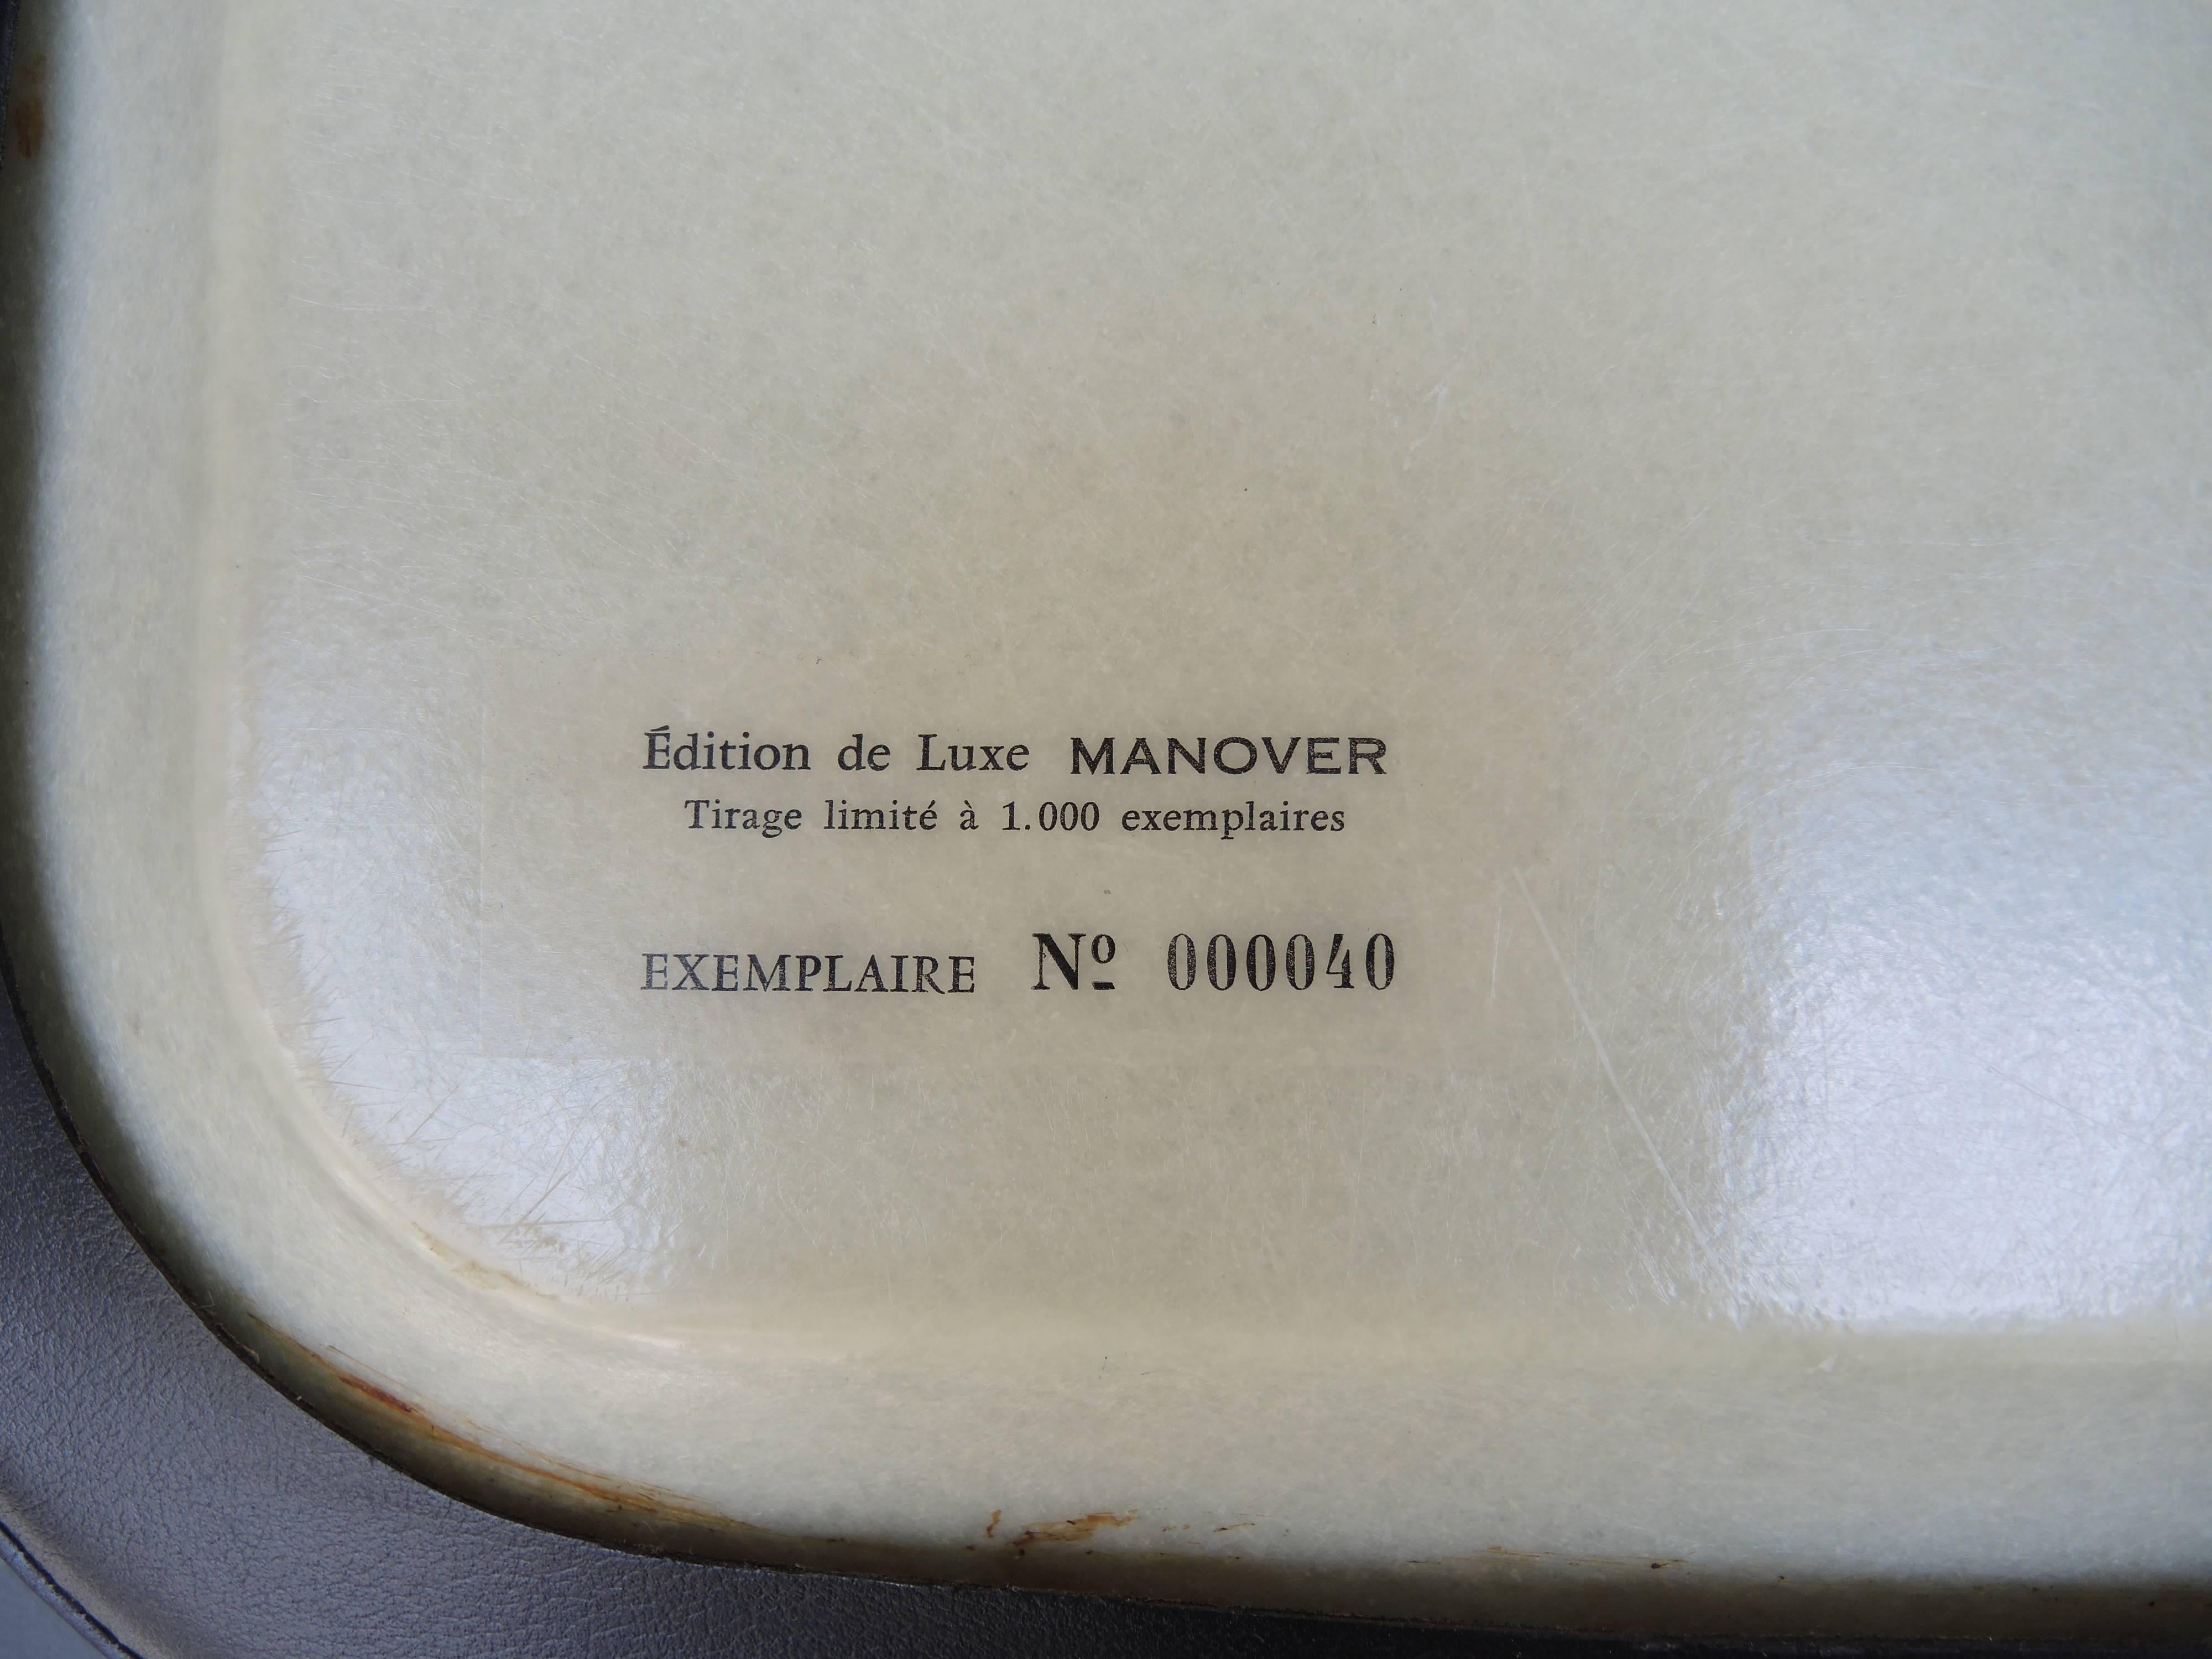 Mid-Century Modern Limited Edition 1960s French Tray with Jean Carzou Image and Jack Adnet Styling